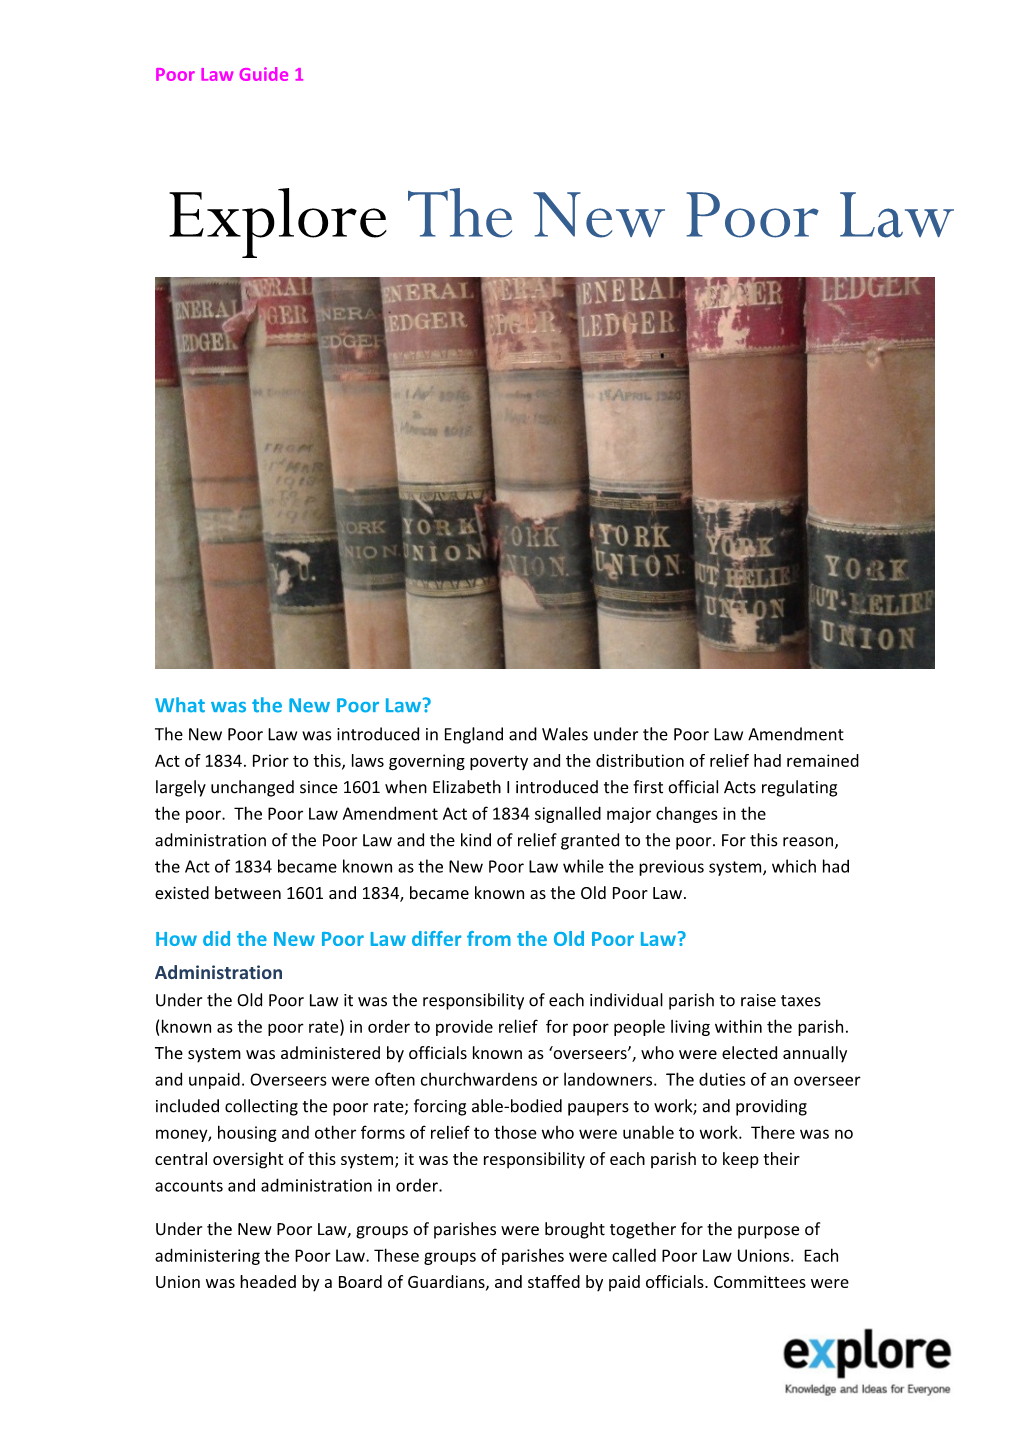 The New Poor Law